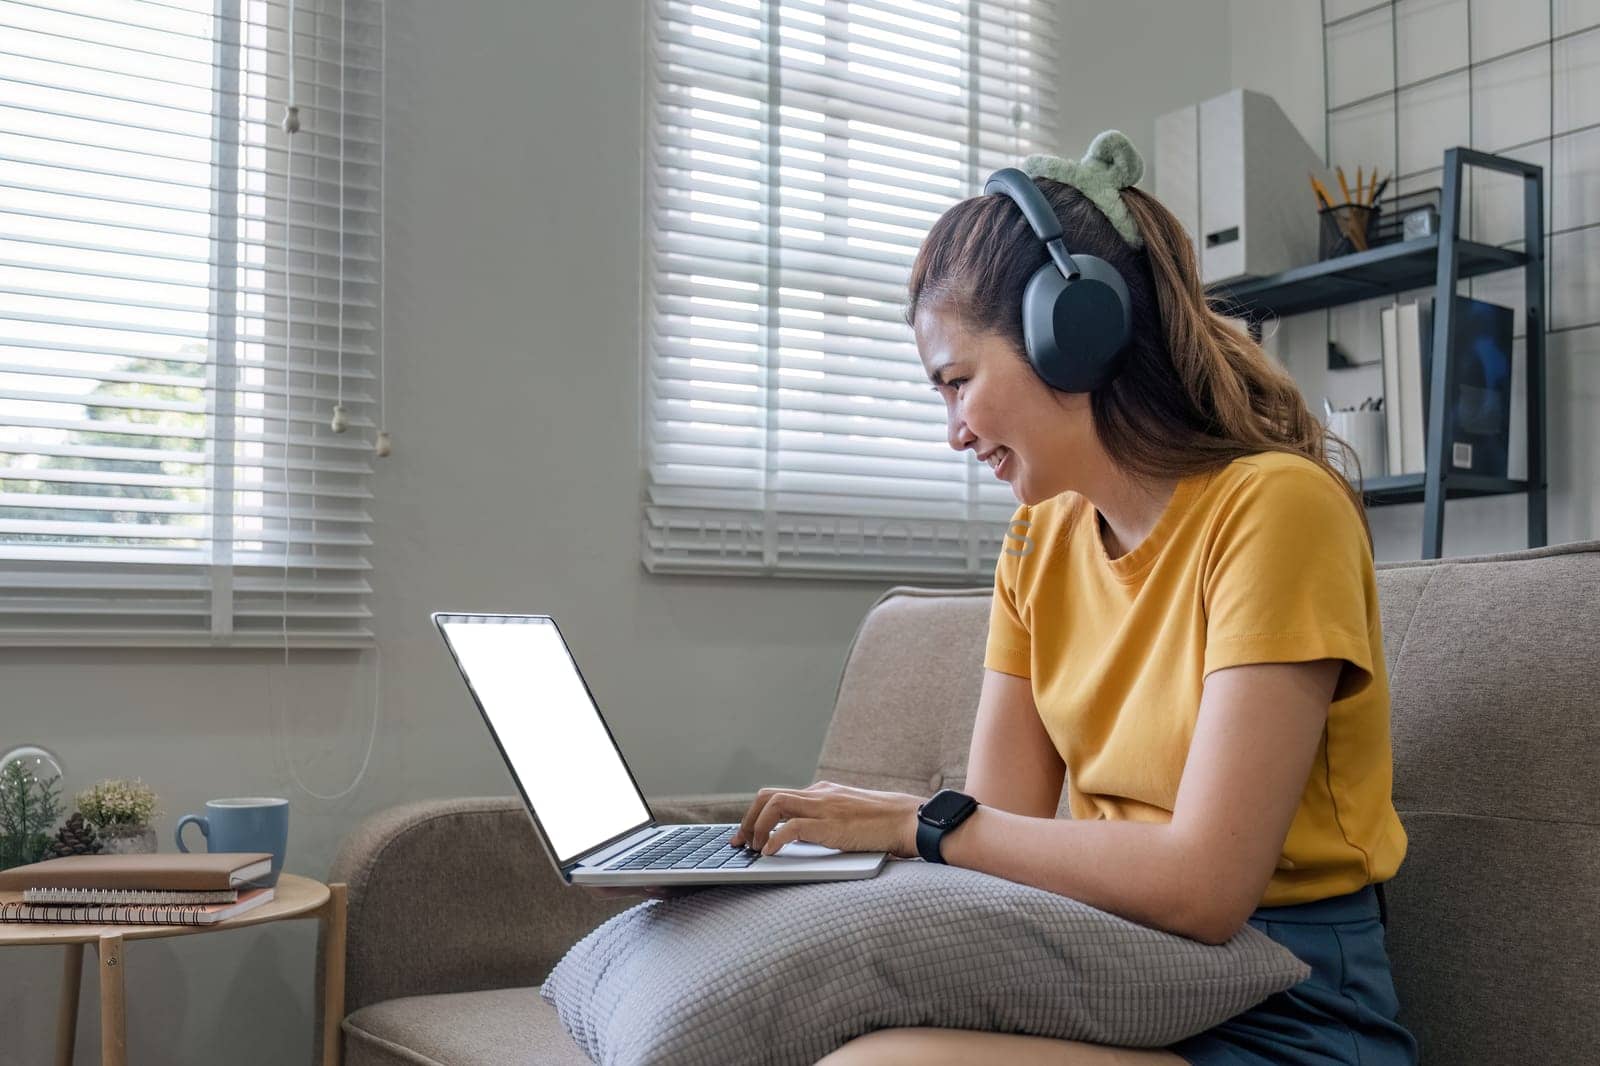 Asian woman sitting on sofa in living room using laptop and listening to music on headphones..